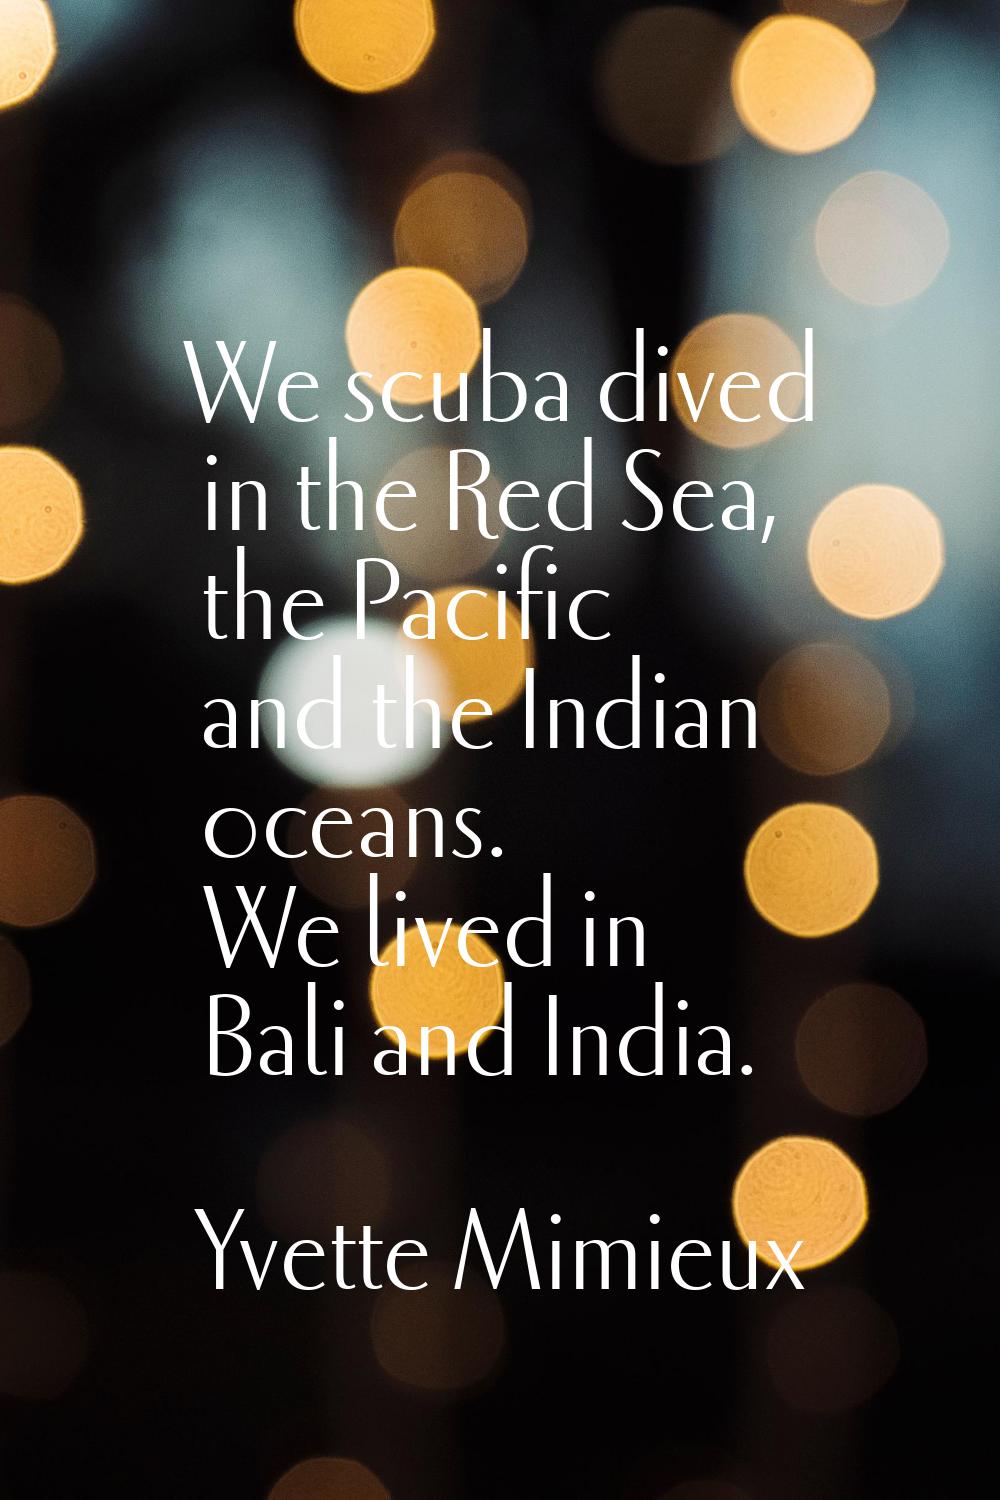 We scuba dived in the Red Sea, the Pacific and the Indian oceans. We lived in Bali and India.